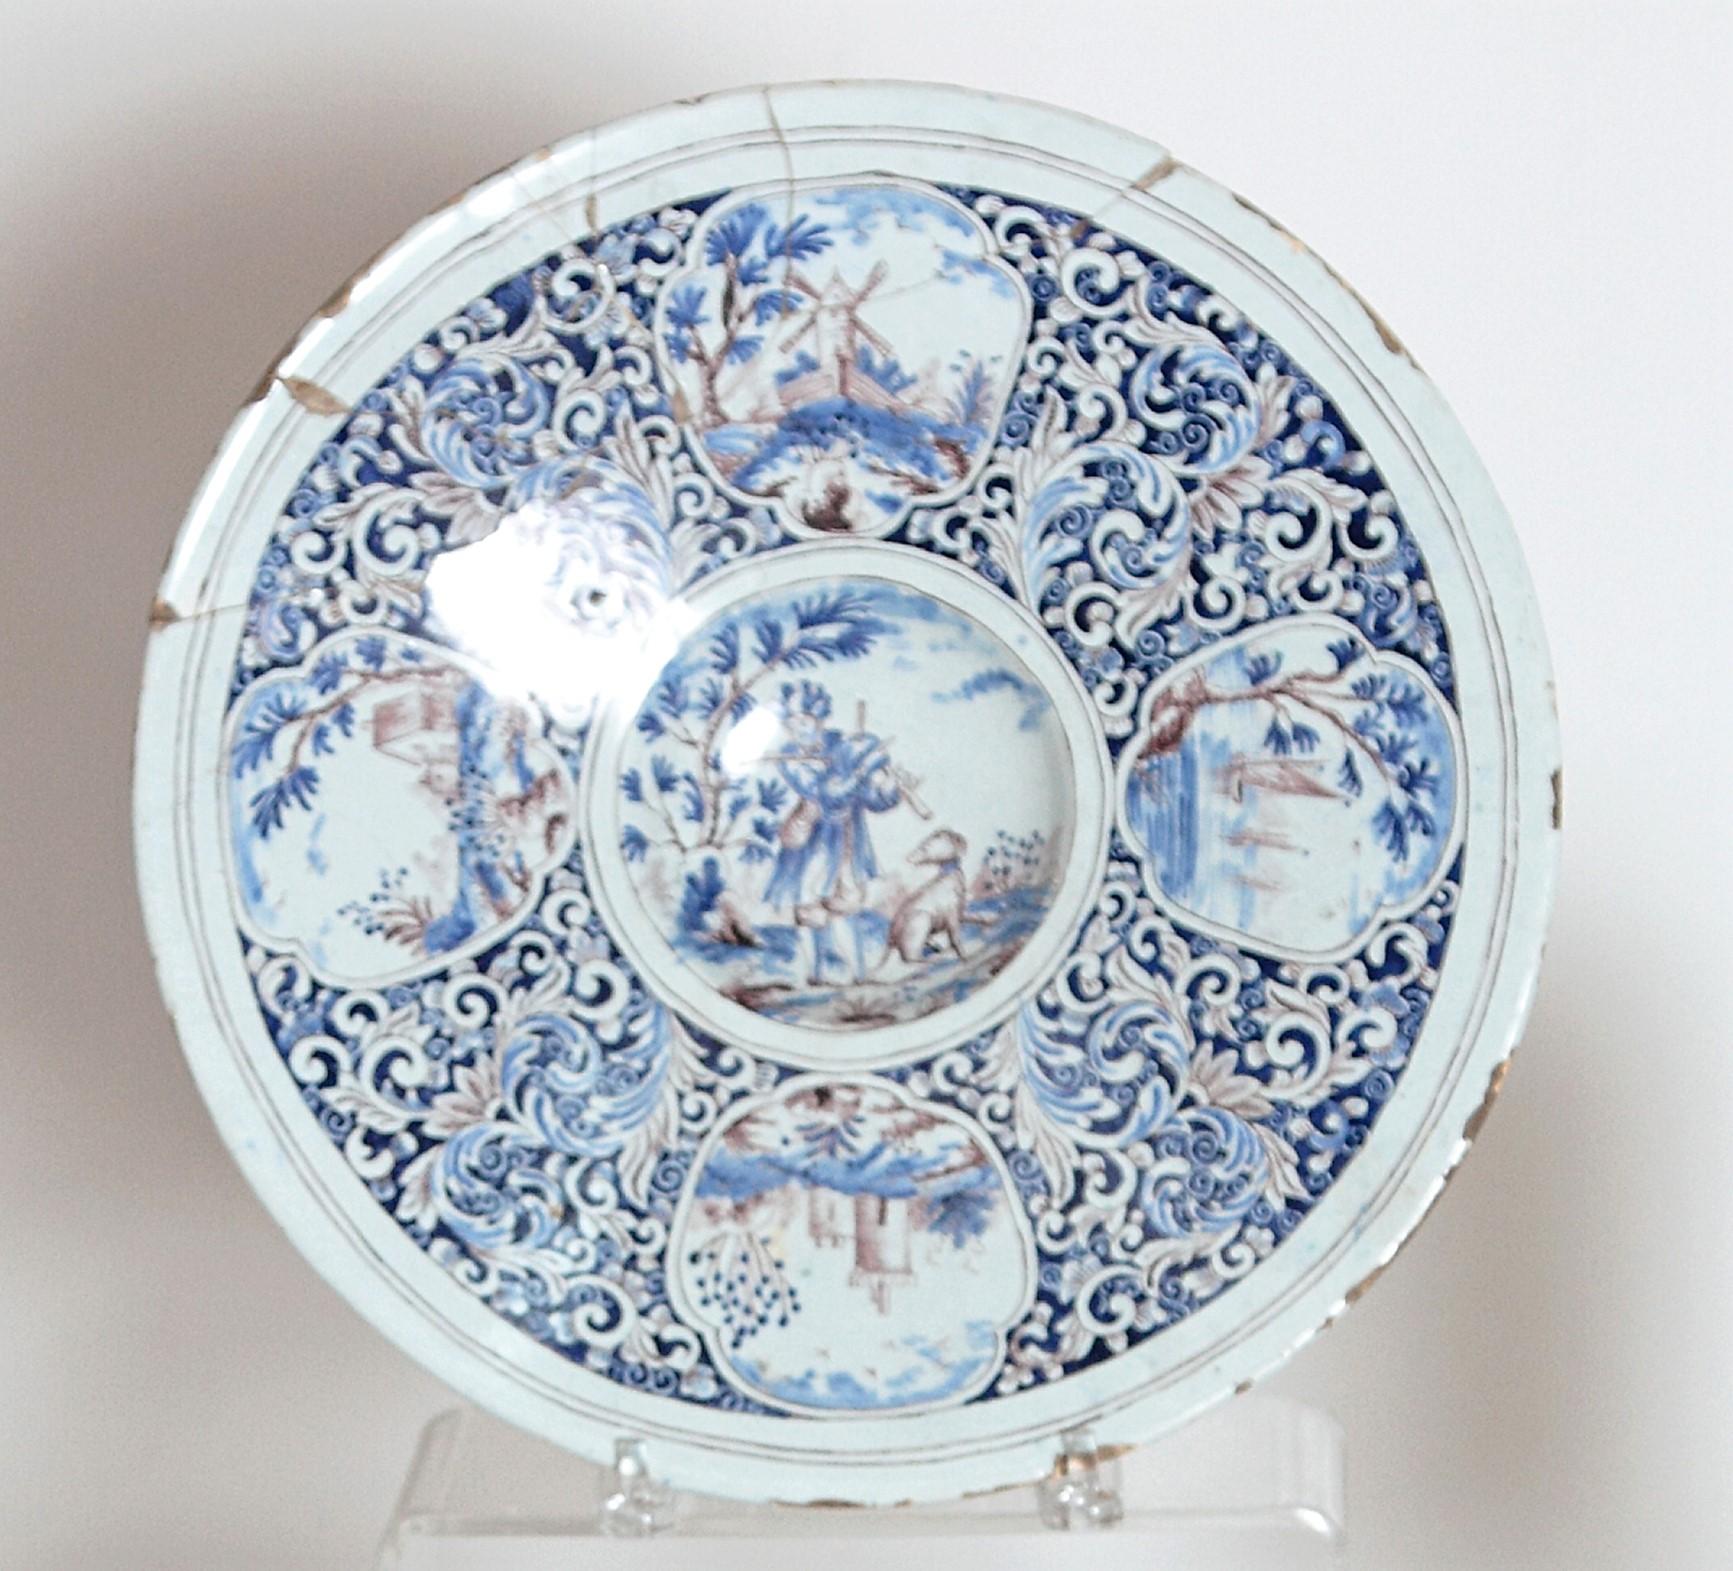 A Large 18th Century Delft Faience Charger with Floral Cartouches For Sale 1